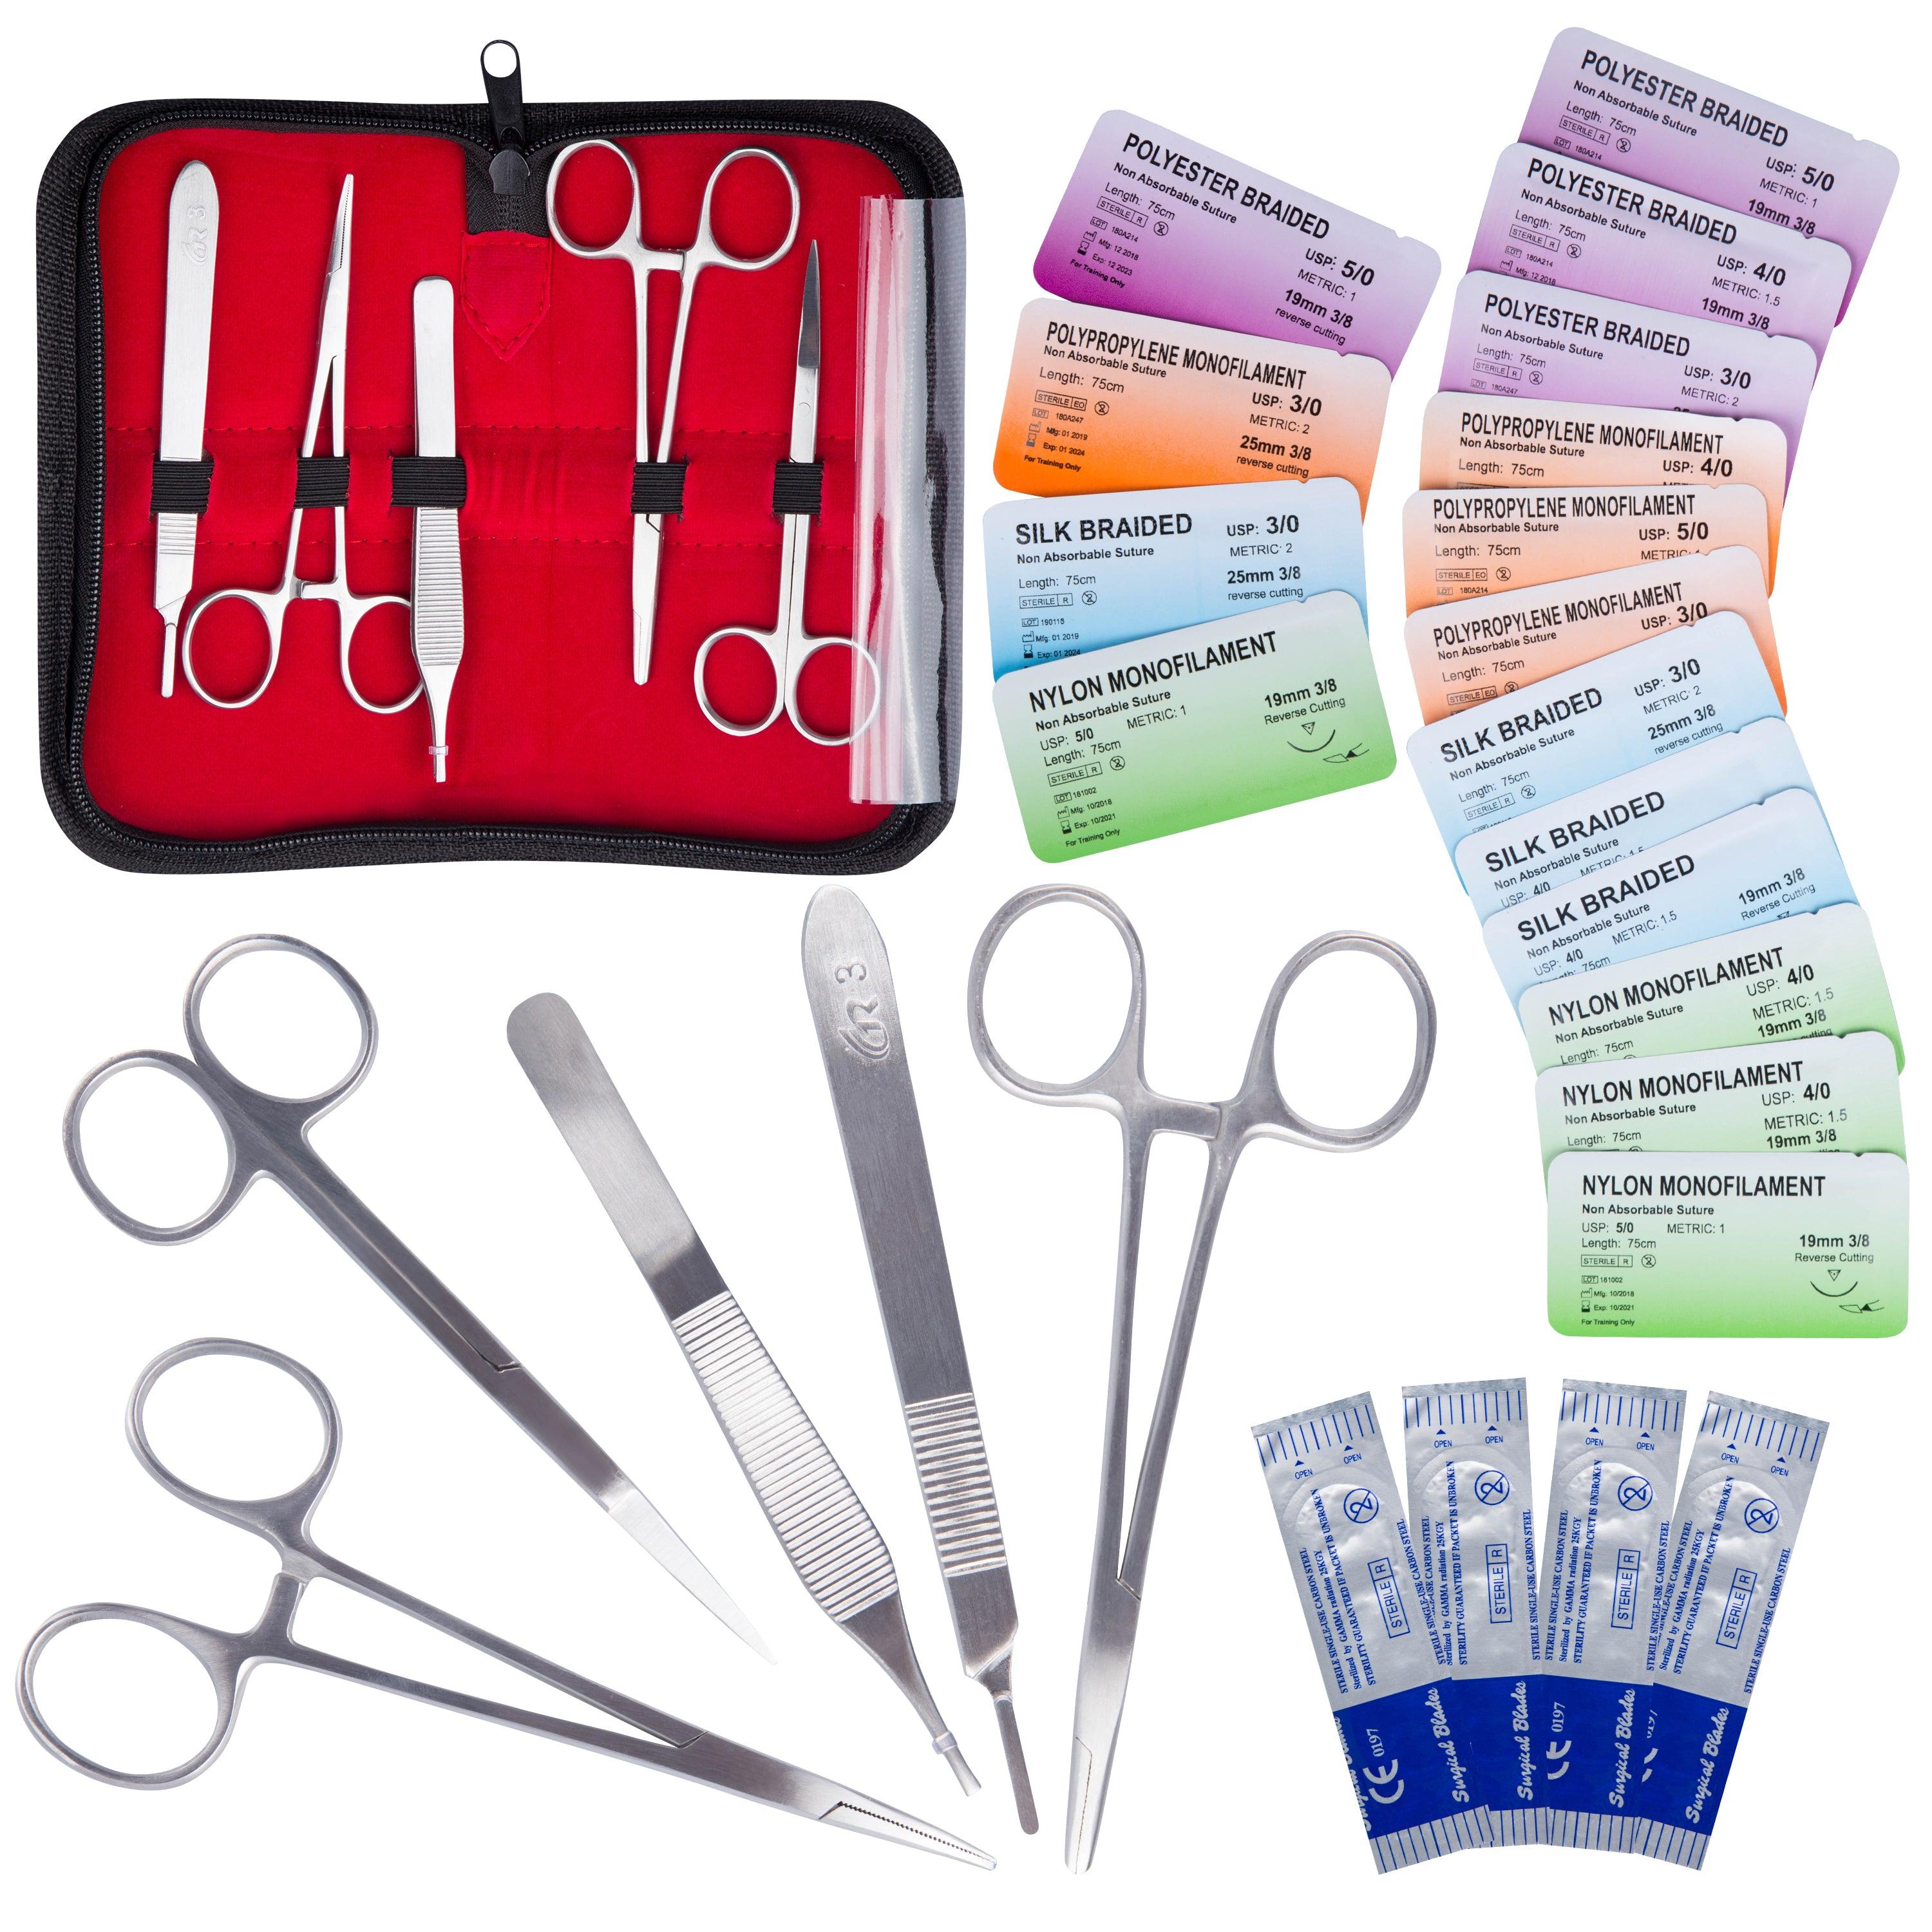 25 Pcs Suture Kit with Large Silicon Suture Pad